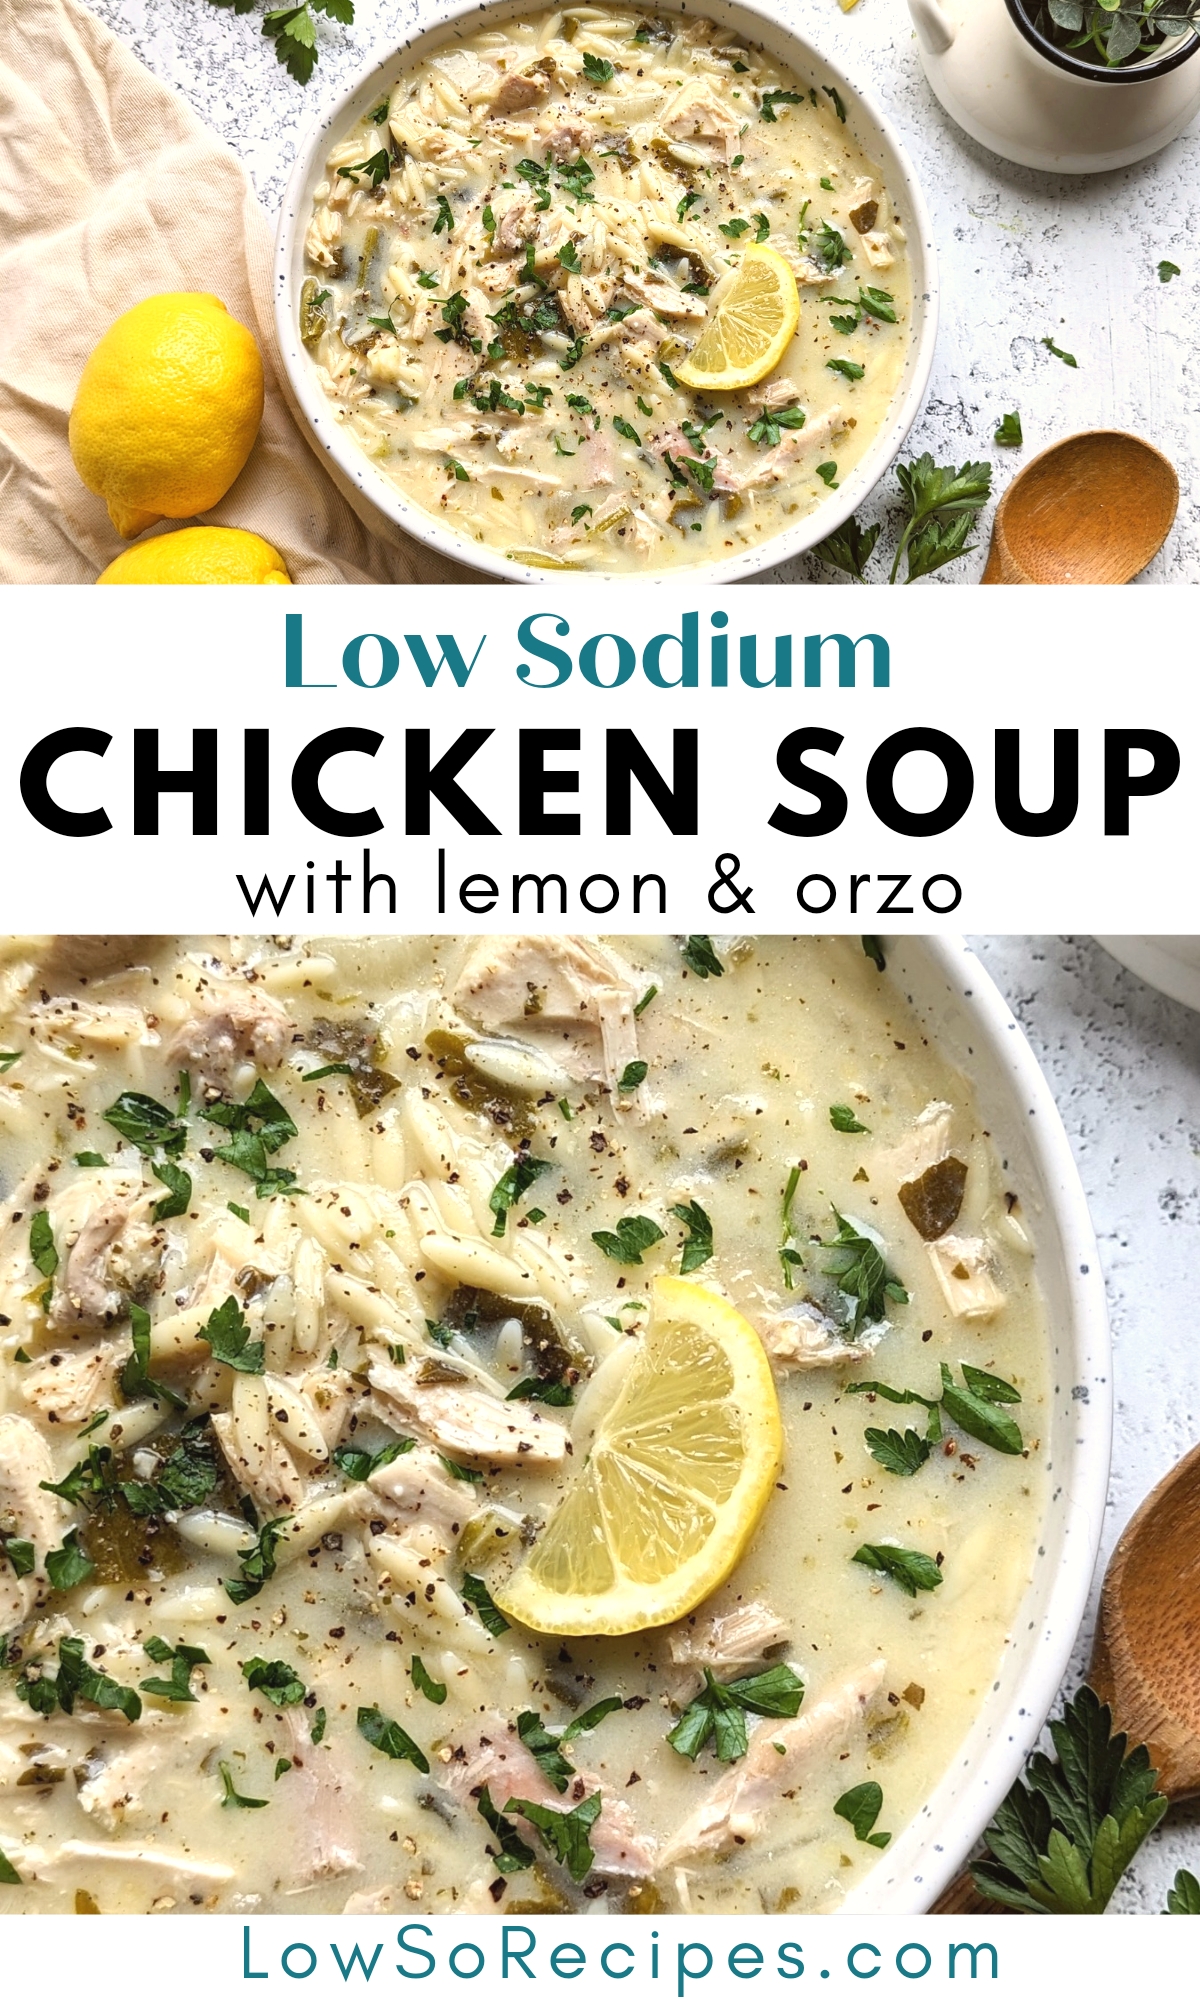 low sodium chicken soup with lemon and orzo recipe creamy chicken soup with lemons